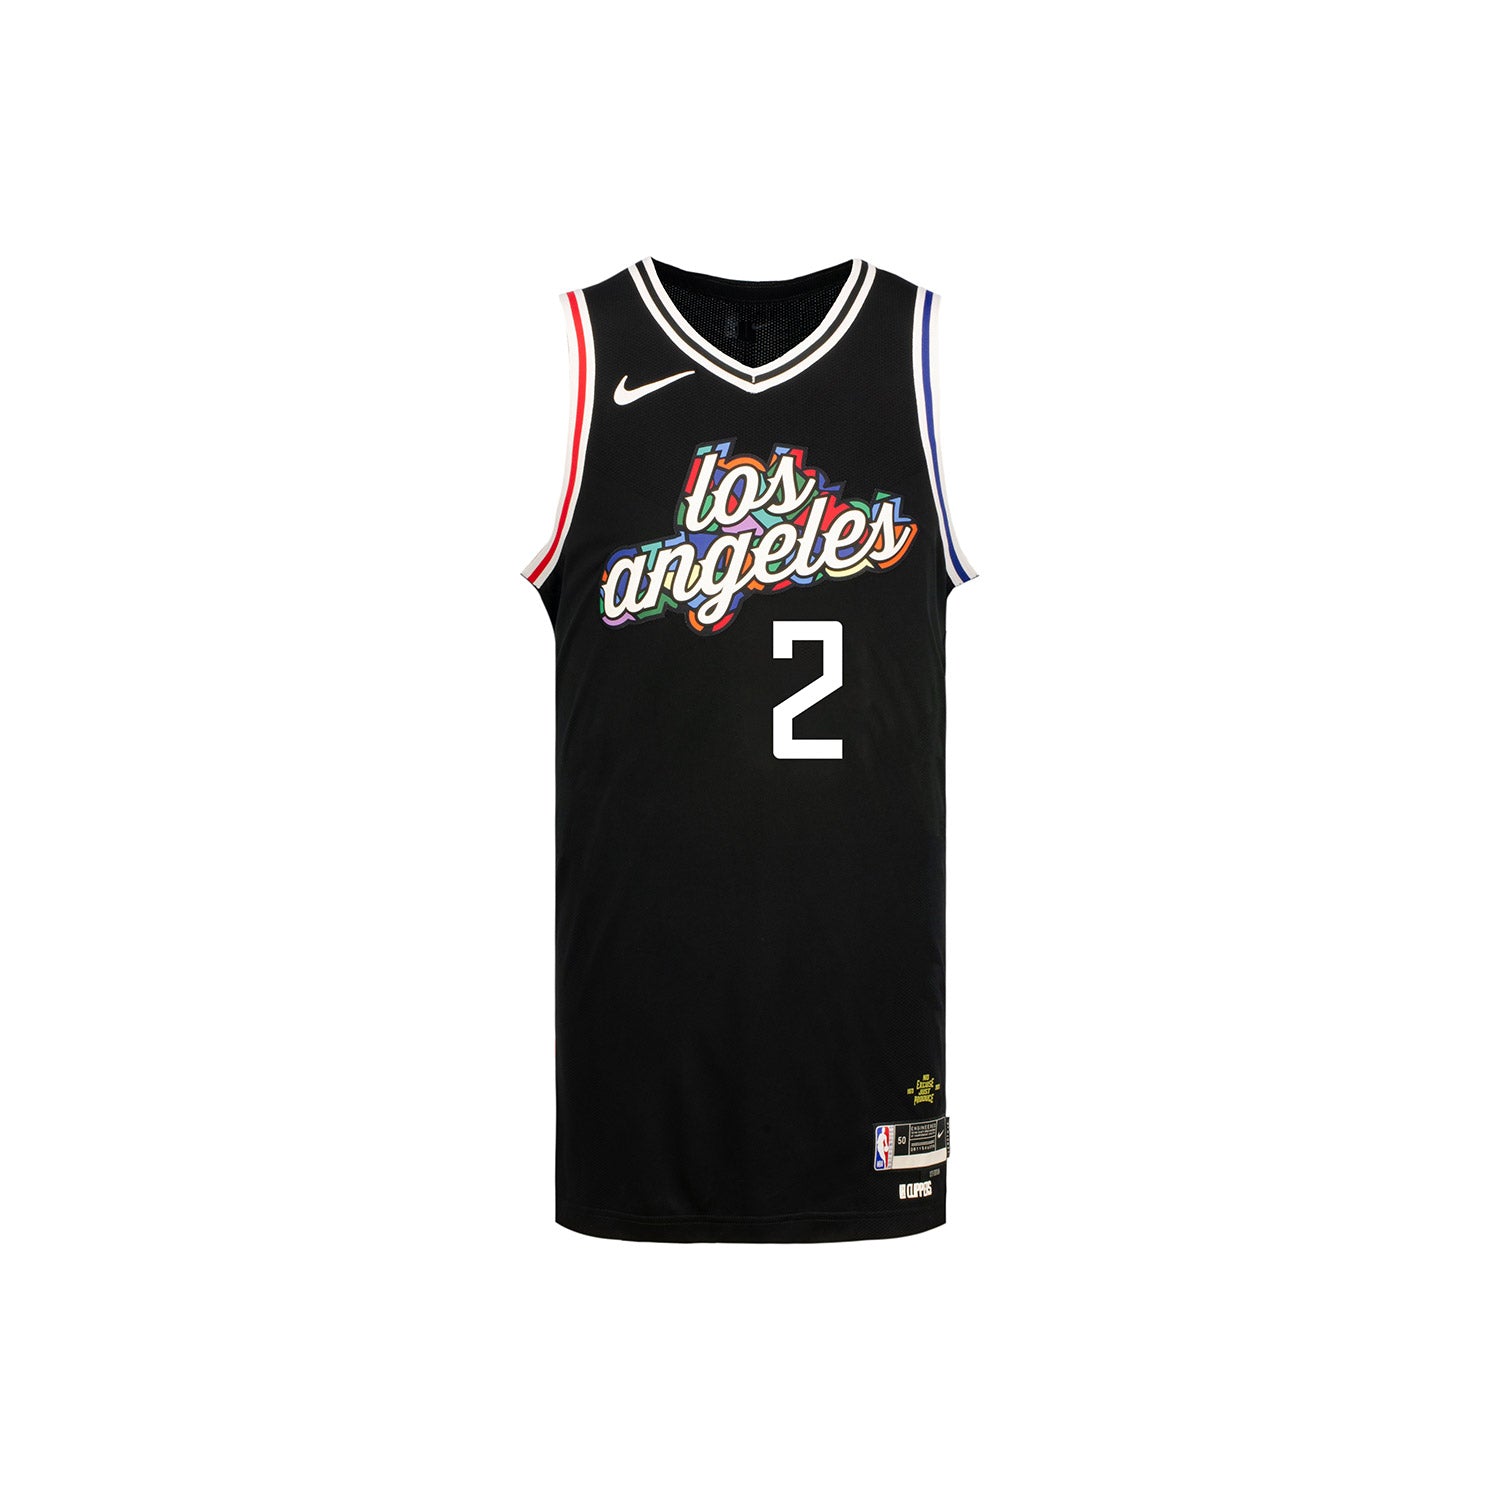 clippers city edition jerseys